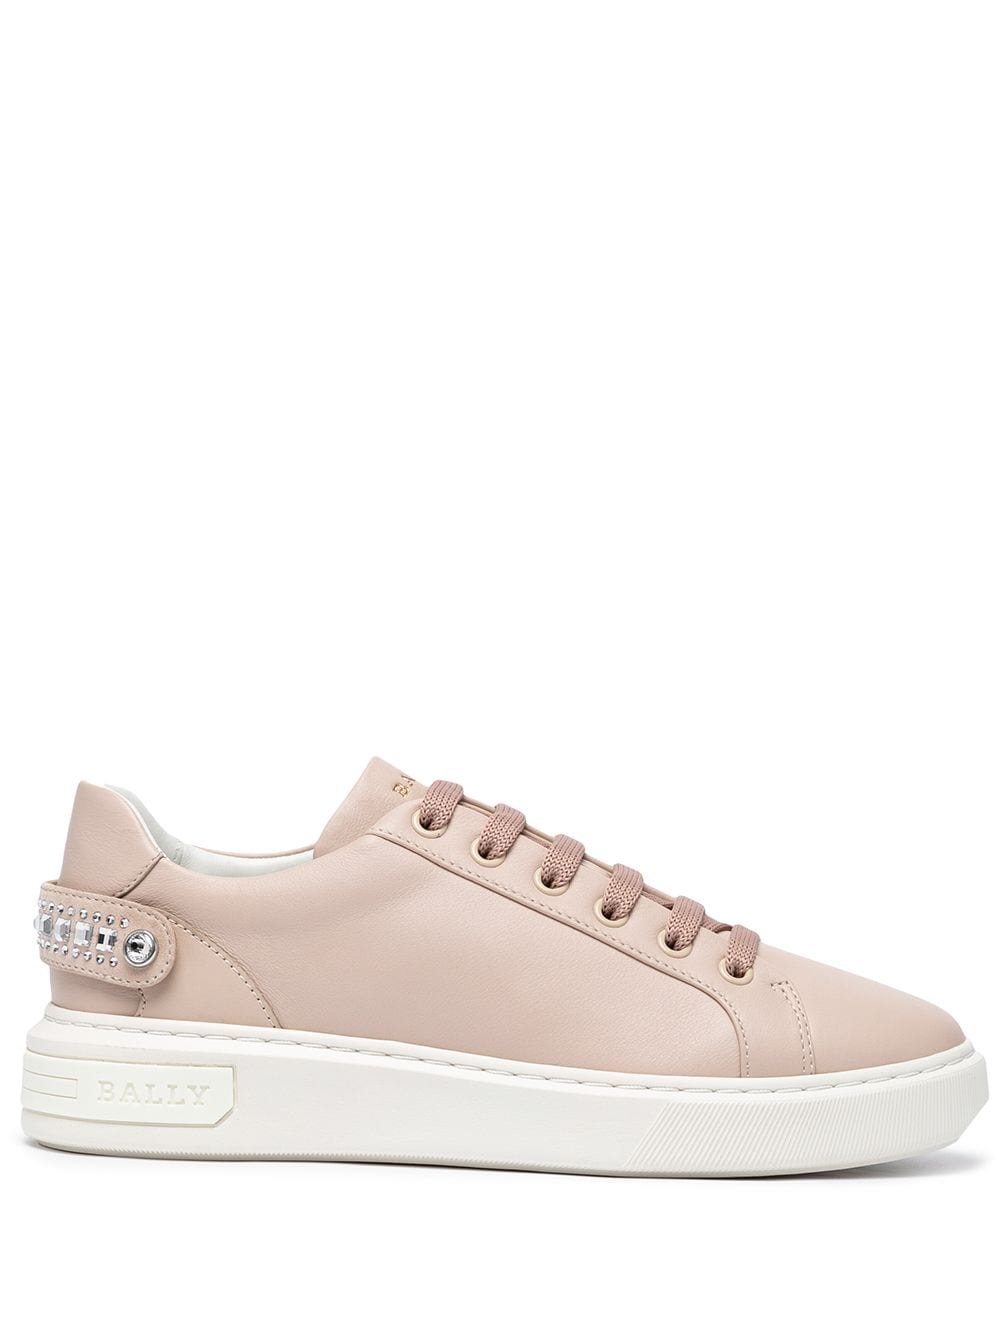 Bally Malya leather sneakers - Pink von Bally